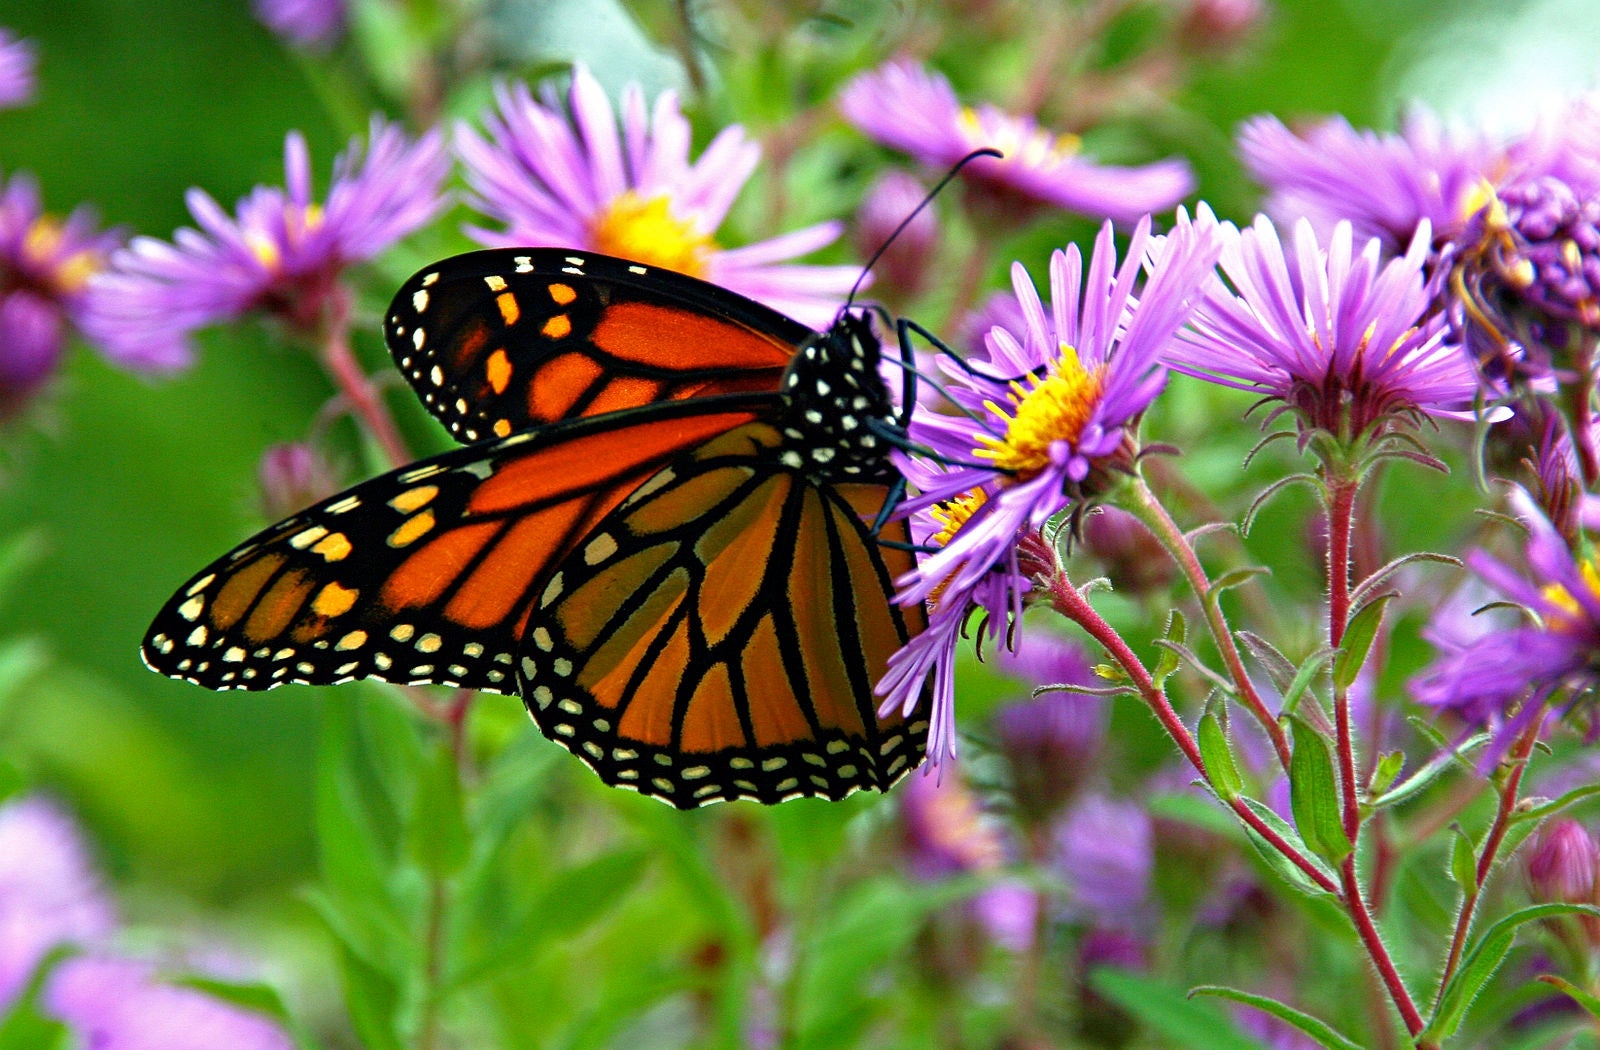 Migratory monarch butterfly habitat to grow in Cape May County - WHYY